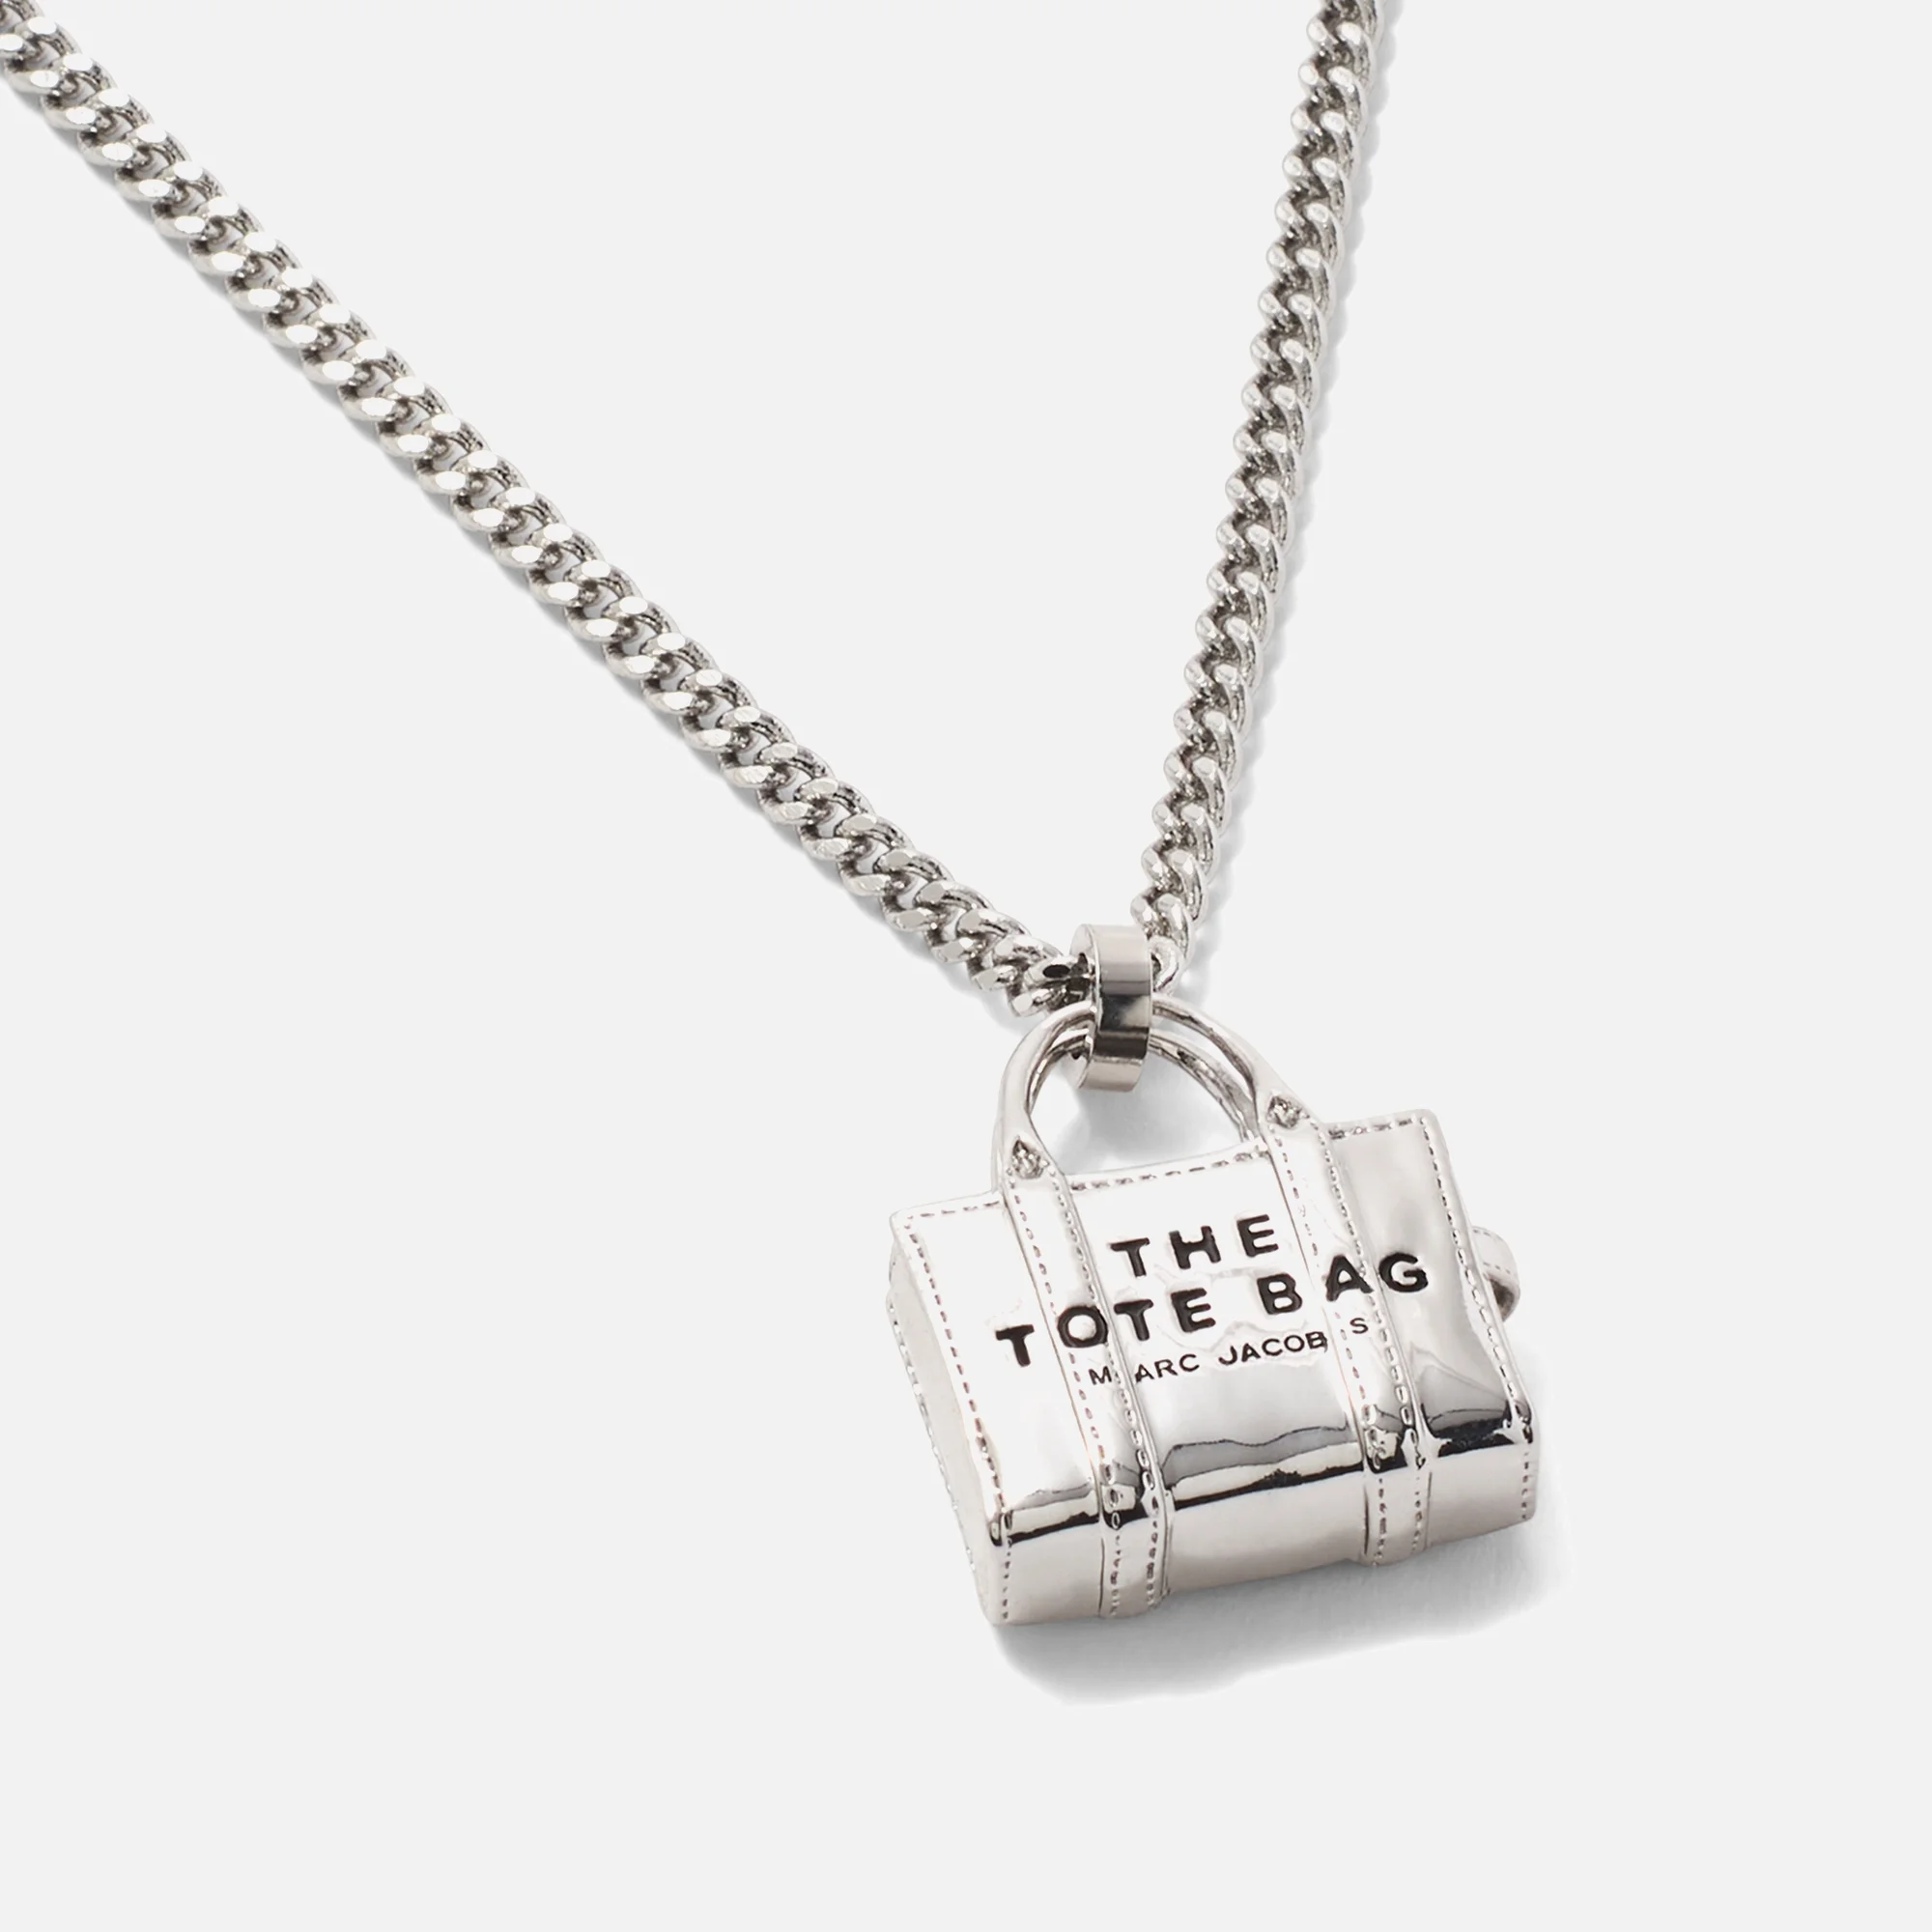 Marc Jacobs Silver-Plated Tote Bag Pendant Necklace Image 1